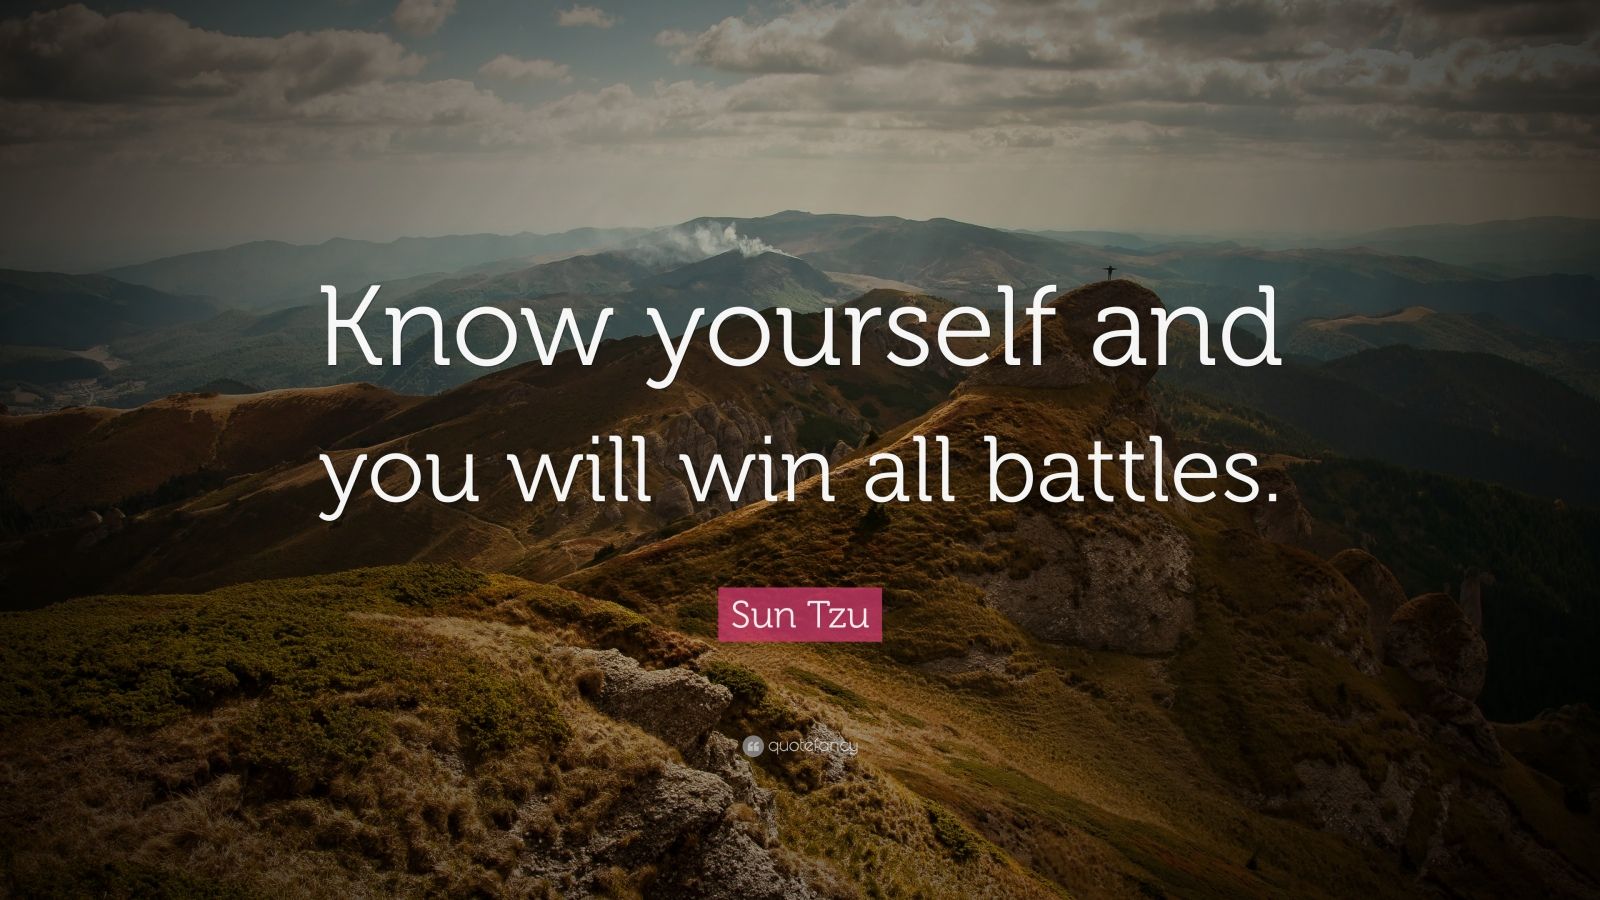 Sun Tzu Quote: “Know yourself and you will win all battles.” (12